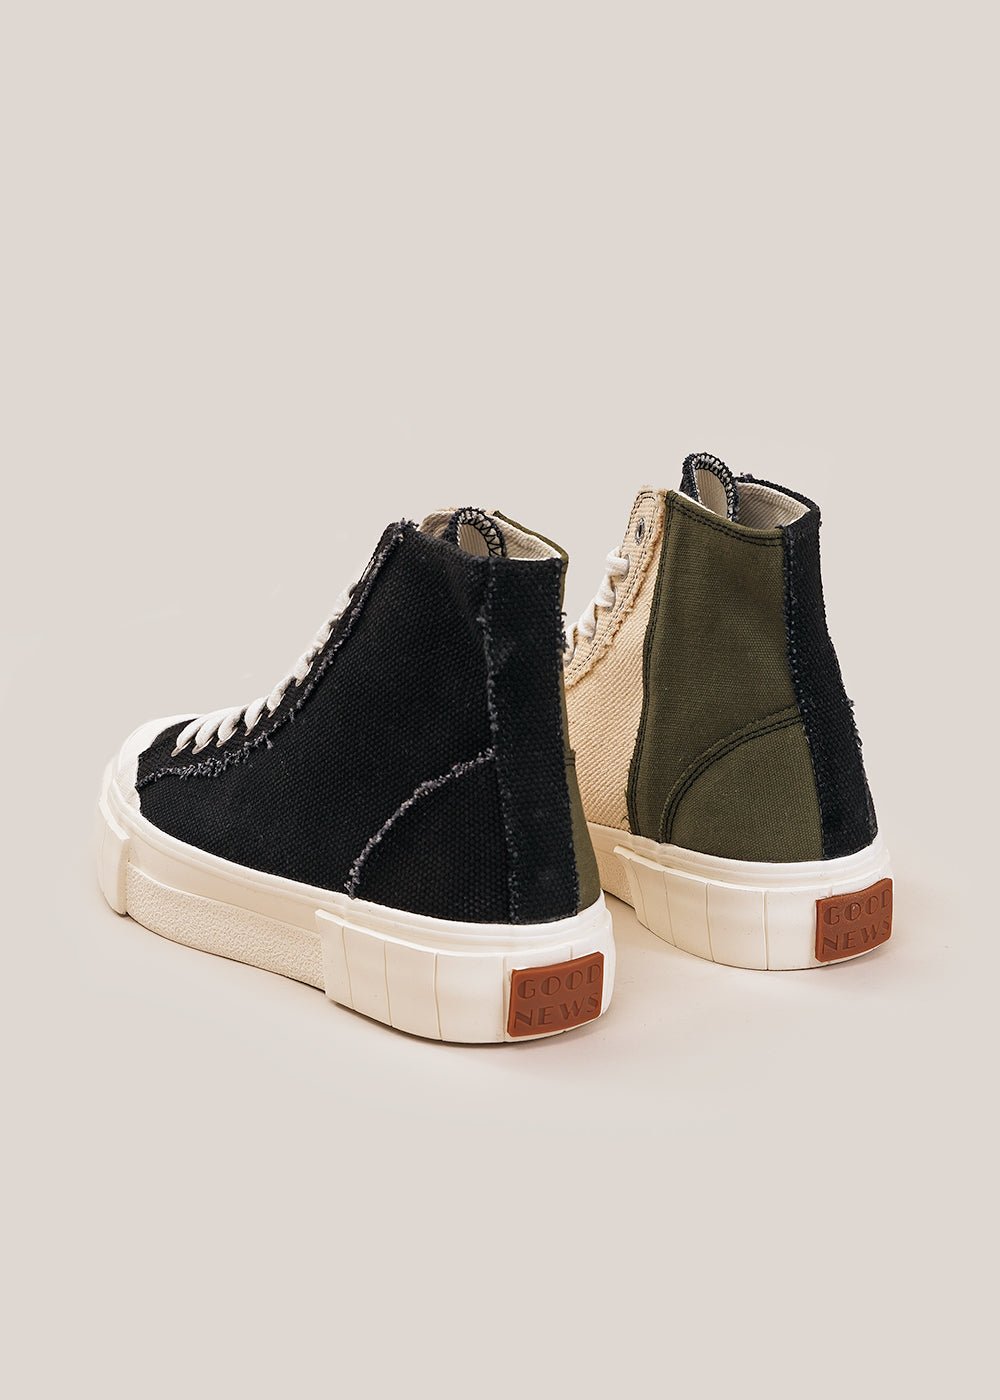 GOOD NEWS Palm Seasonal Sneakers - New Classics Studios Sustainable Ethical Fashion Canada